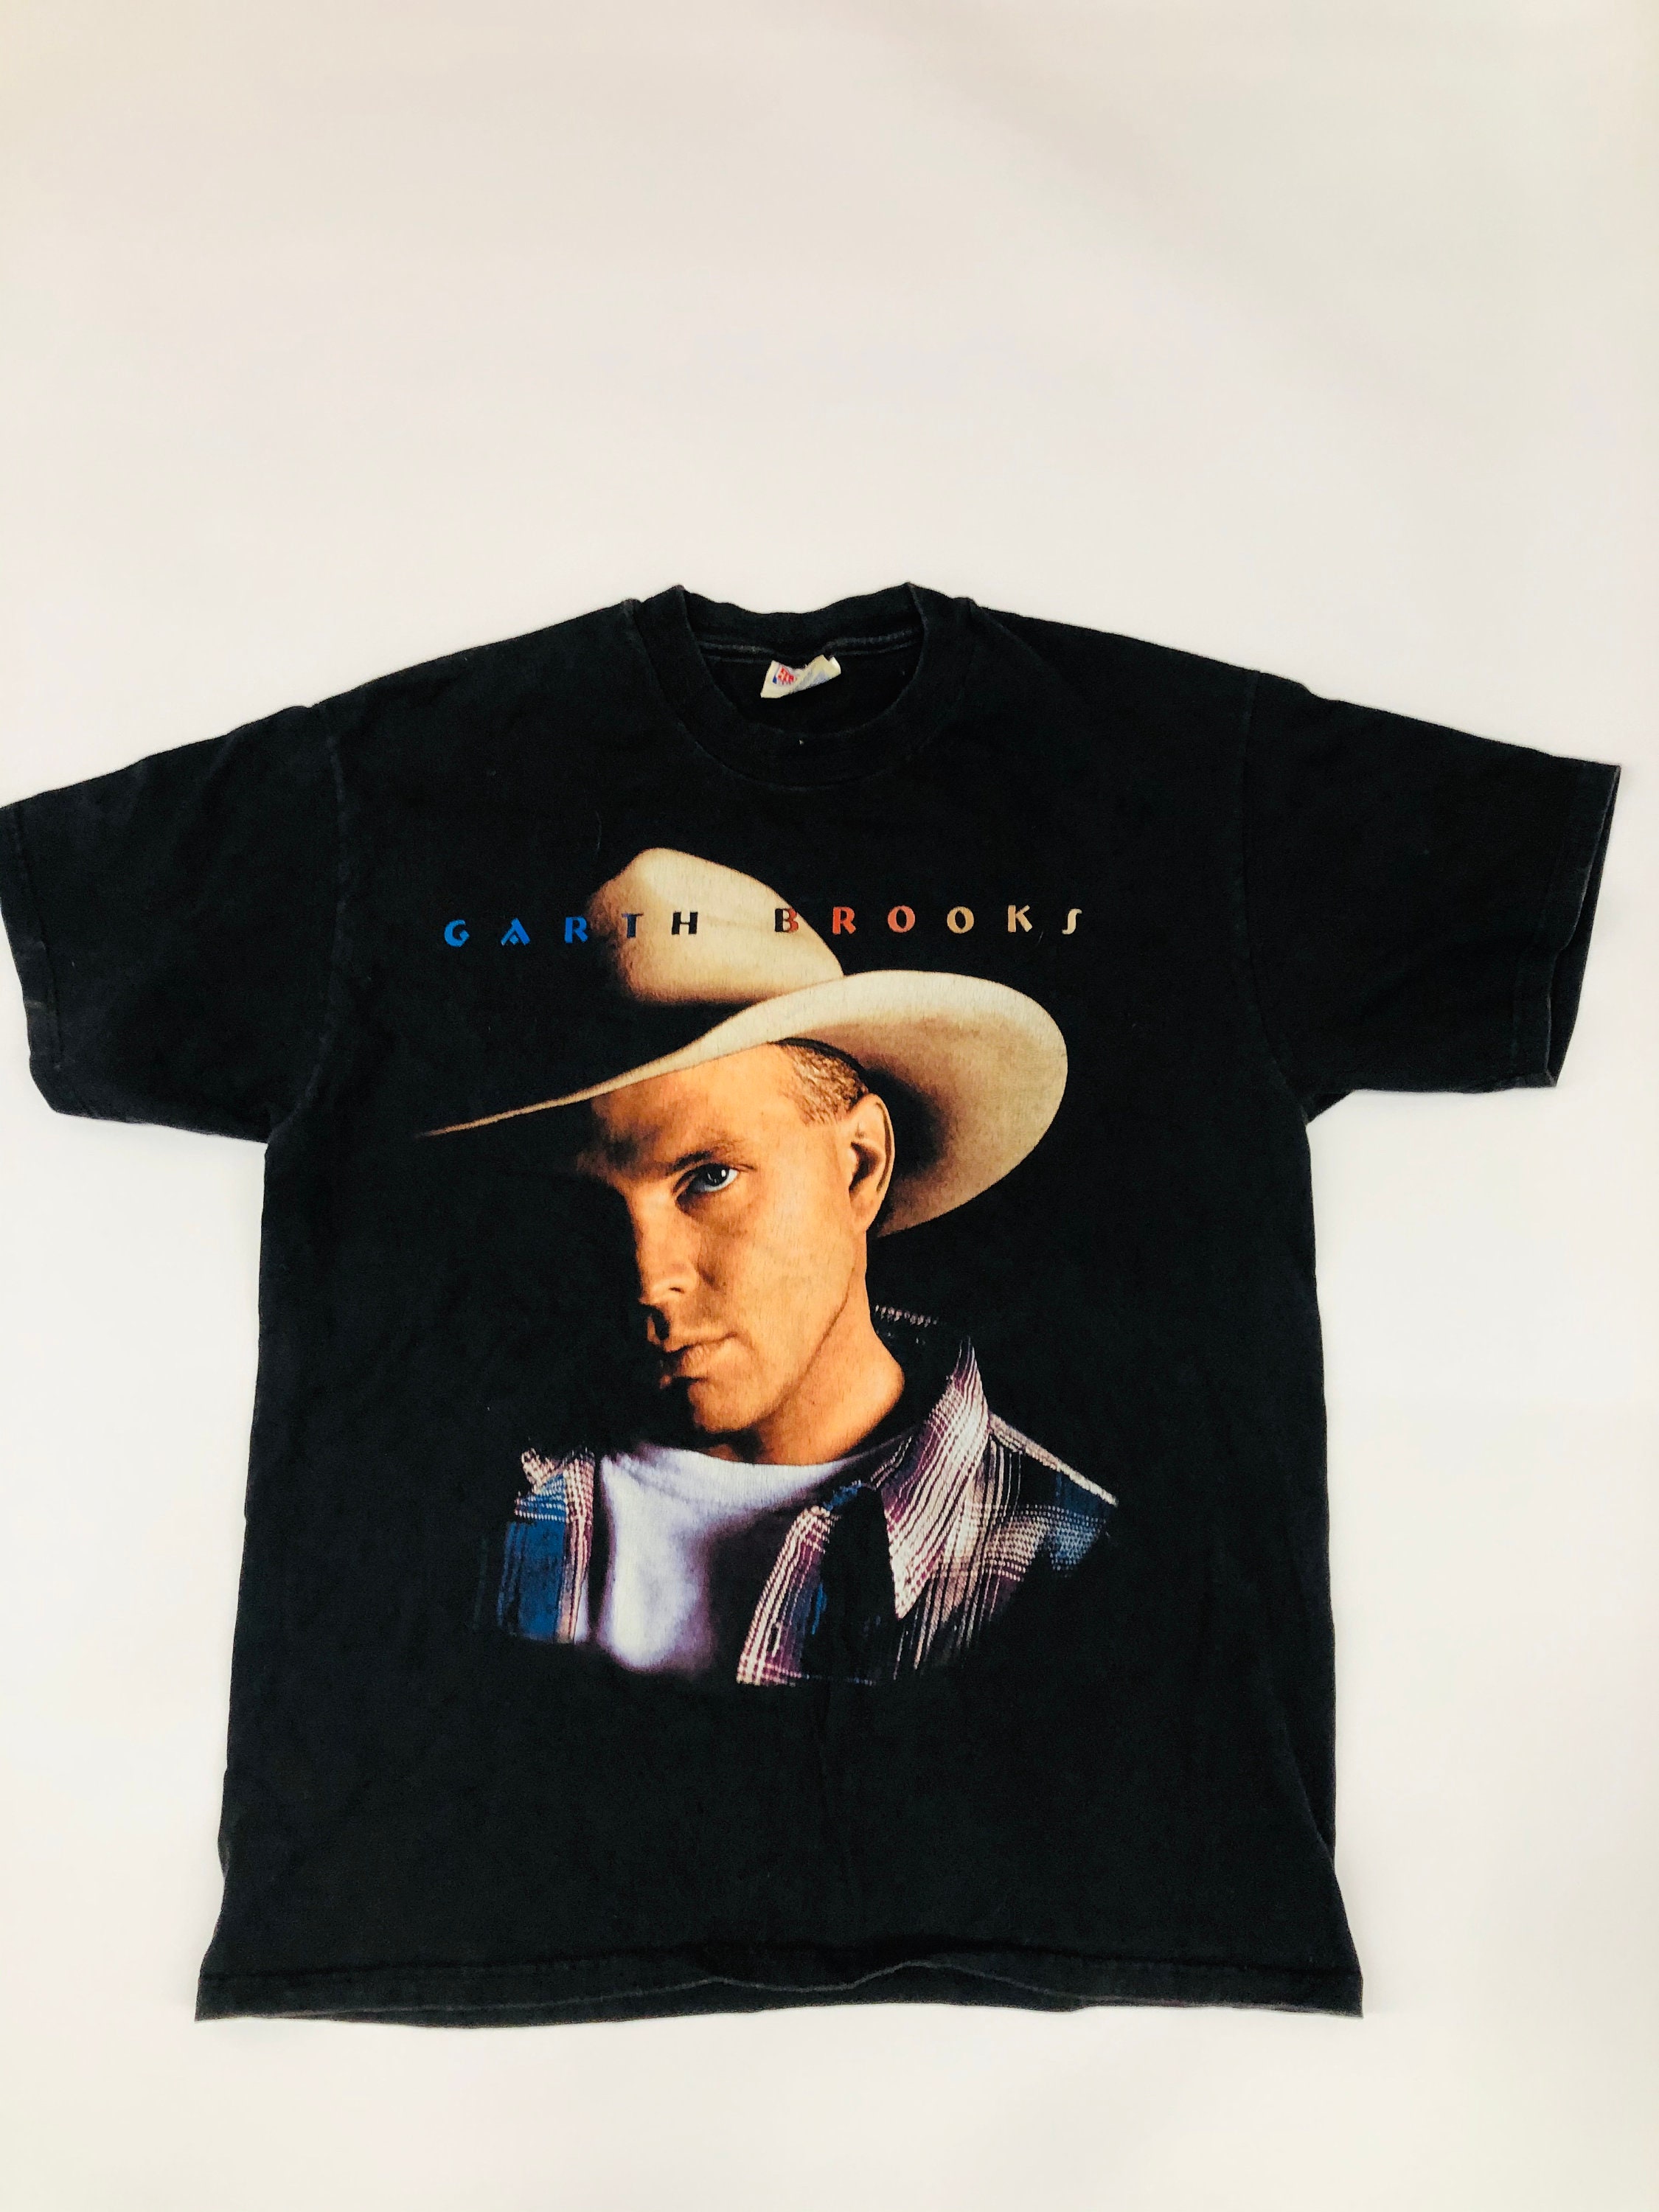 Garth Brooks "Country Music" Personalized T-shirts